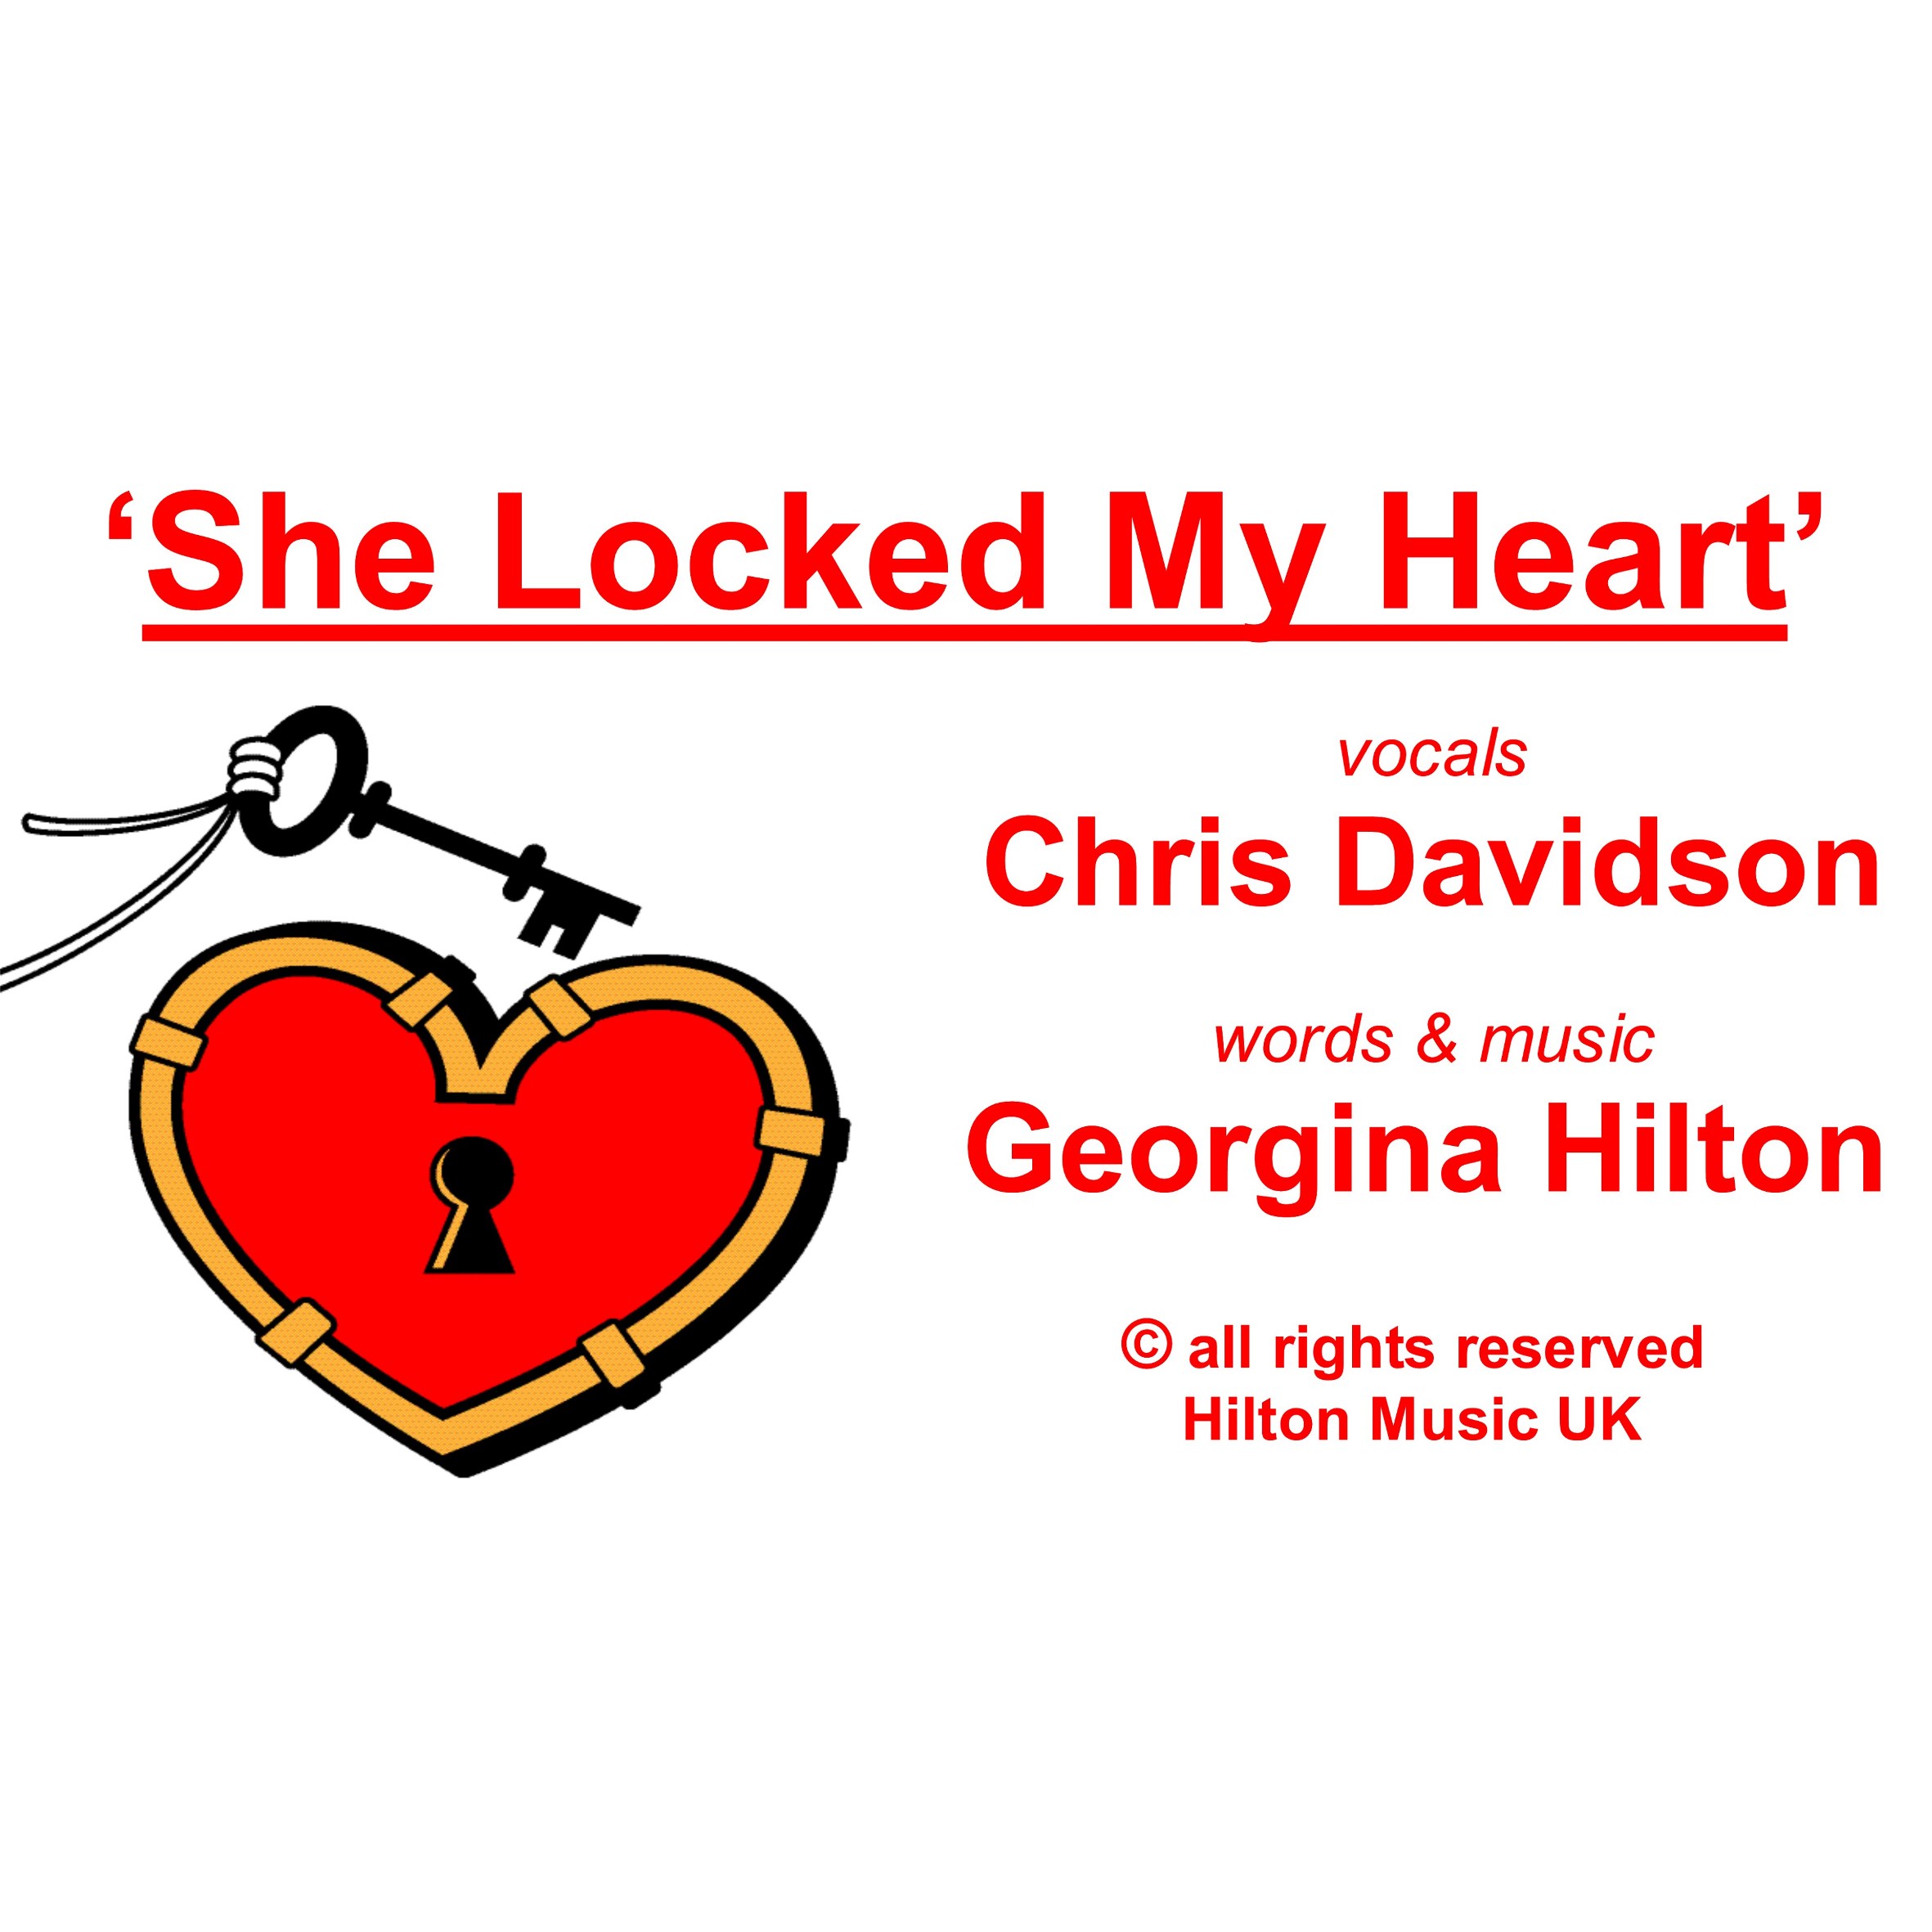 'One foolish moment, a lifetime to repent ... SHE LOCKED MY HEART and threw away the key'   CHRIS DAVIDSON sings for Hilton Music UK